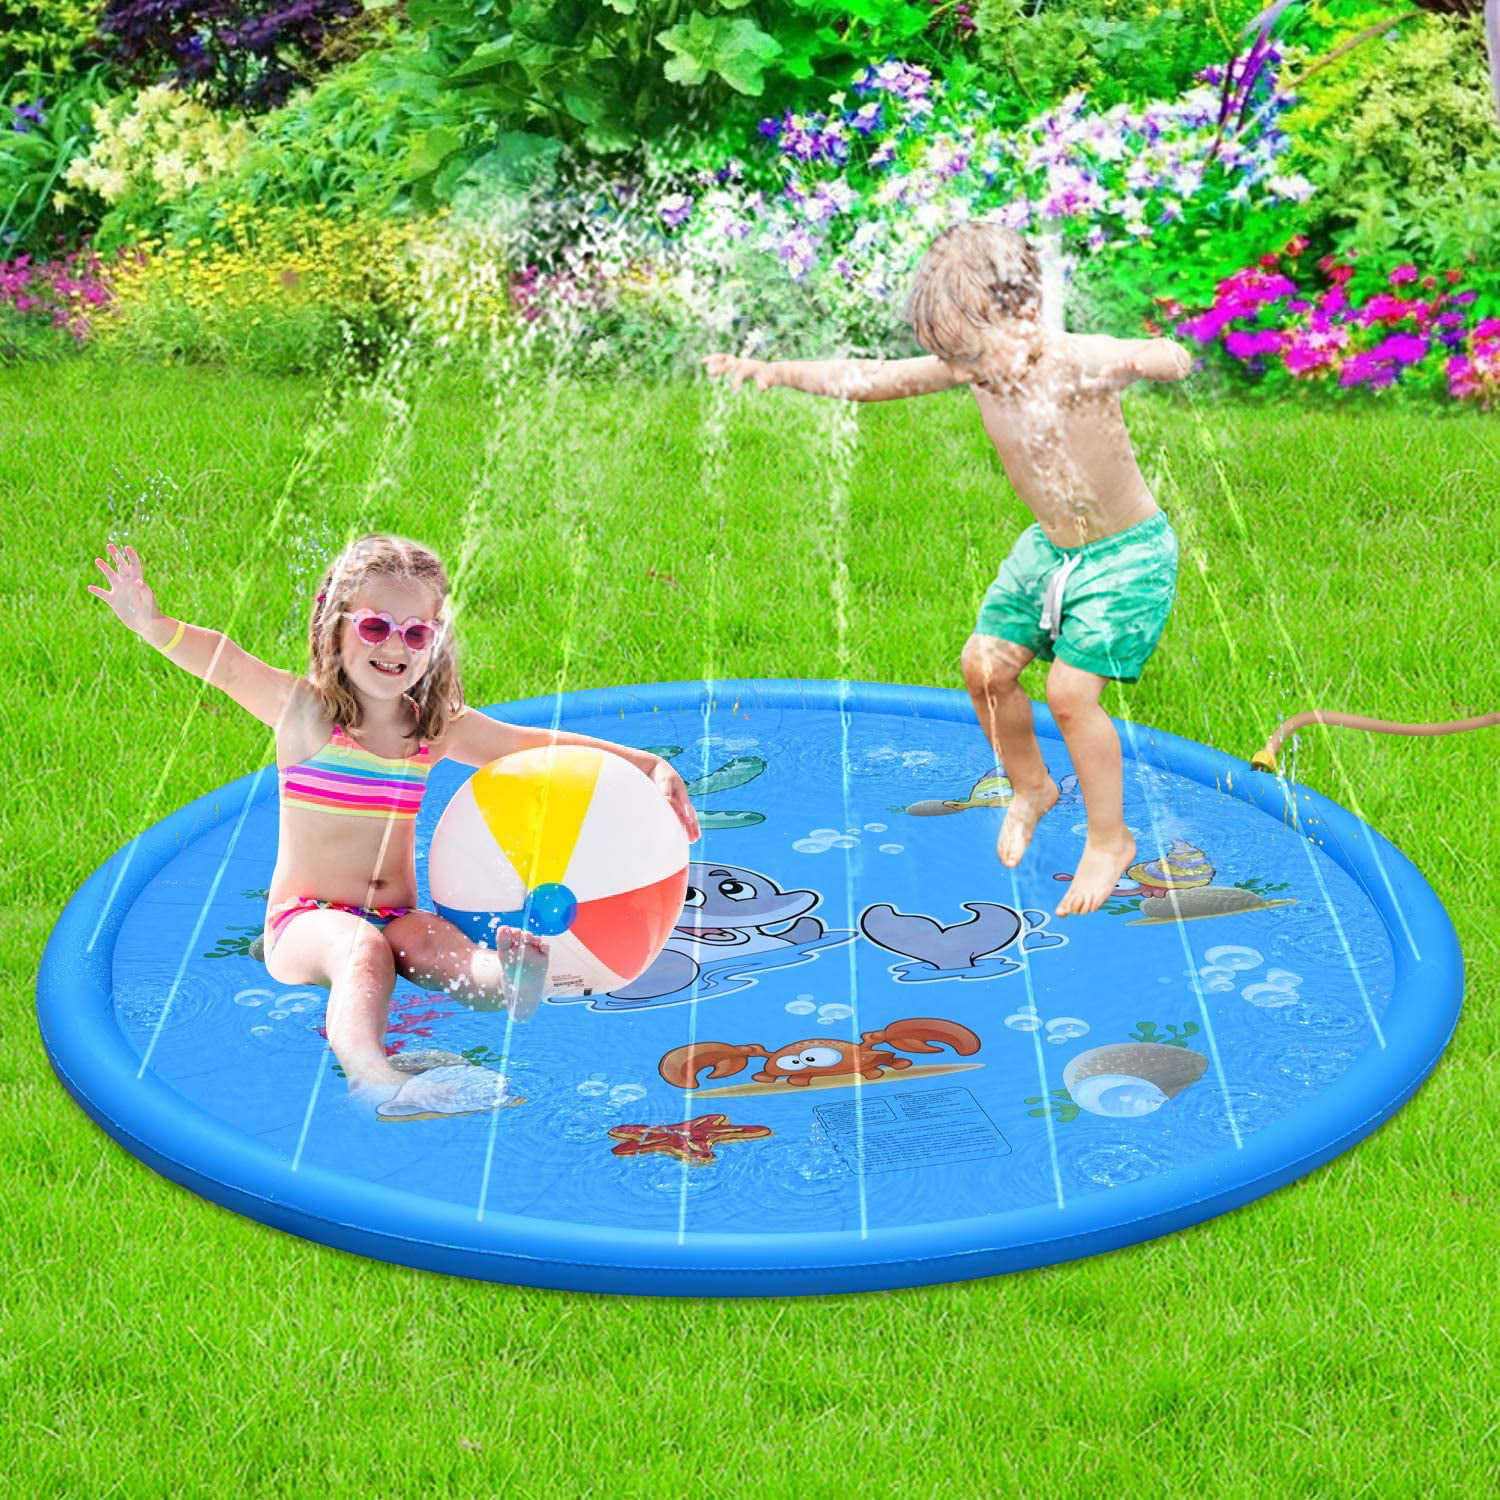 Summer Essential Spray Toys for Kids and Outdoor Garden Family Activities OOFAJ 68 Inches Splash Water Play Mat,Splash Pad Durable Portable Inflatable Sprinkler Pad Sprinkle Wading Pool